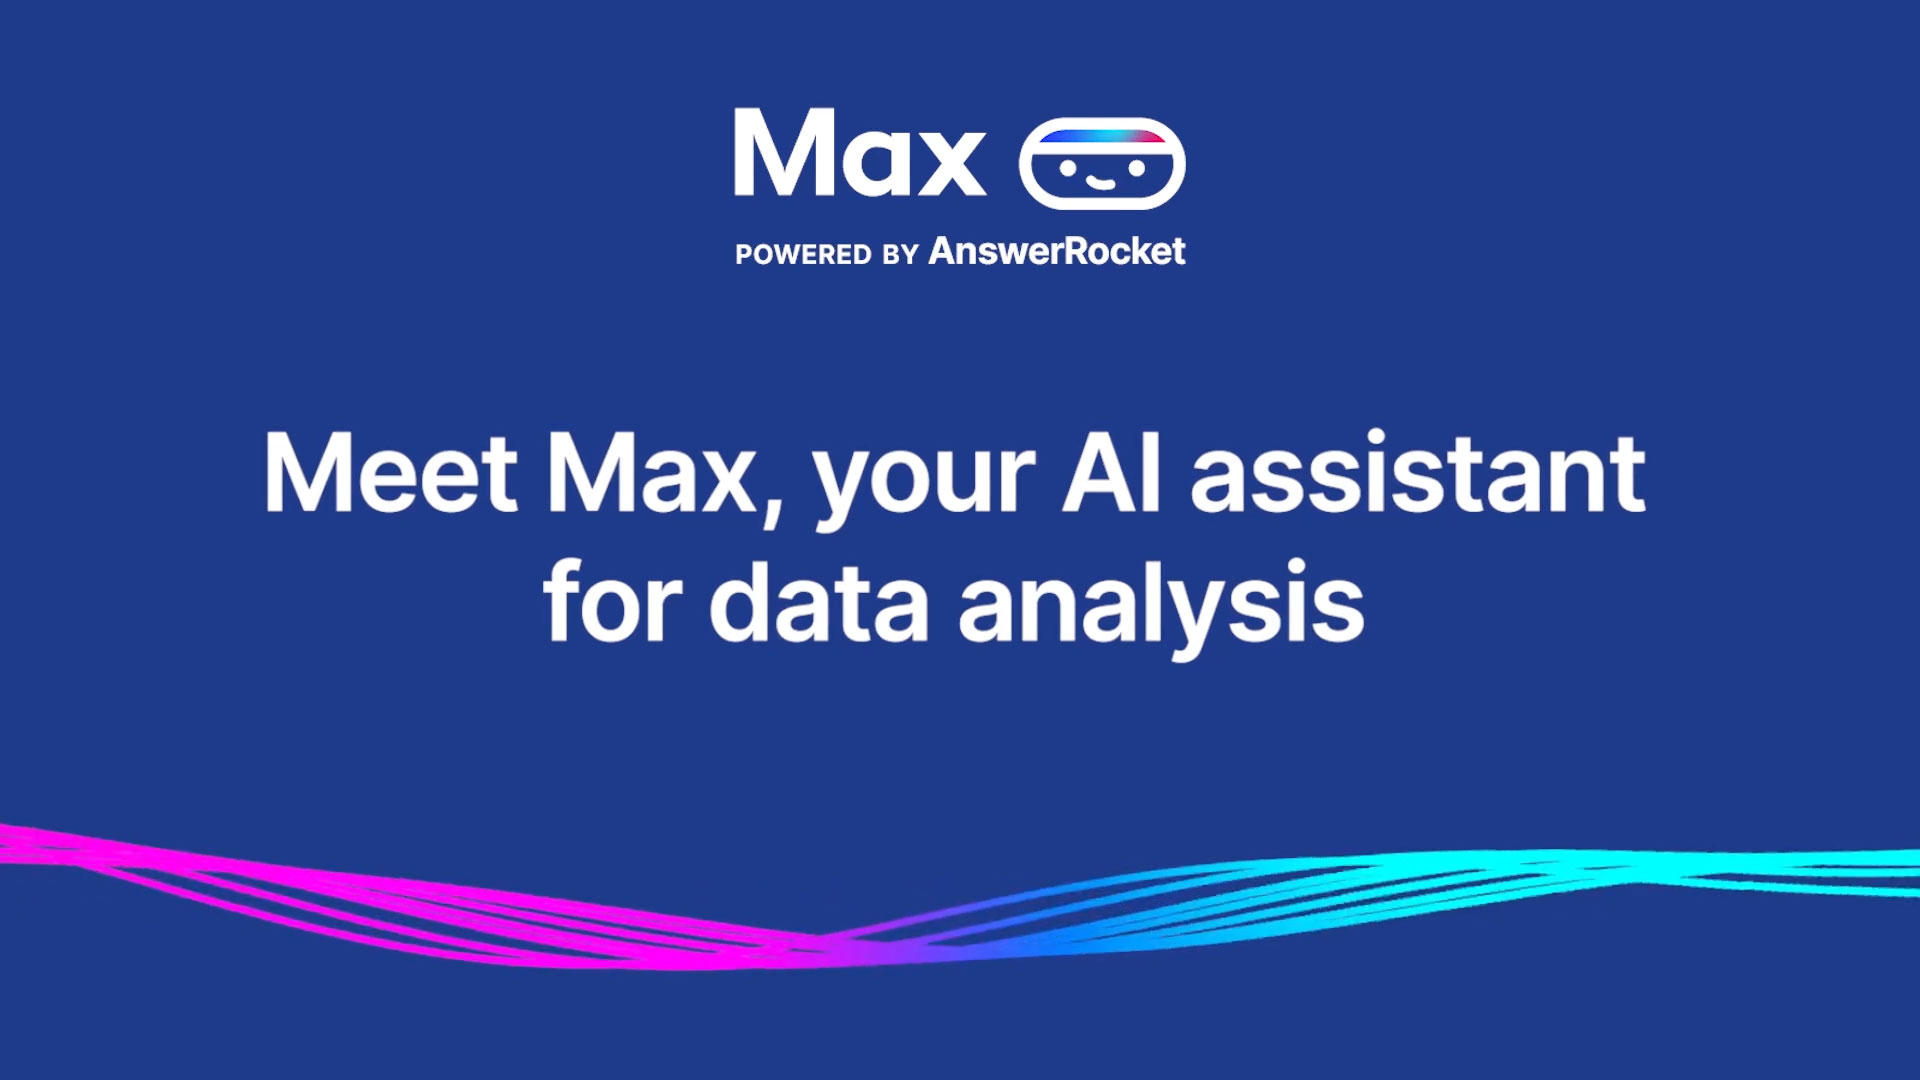 AnswerRocket announces new features of its industry-first GenAI analytics platform, Max. Learn more: https://www.answerrocket.com/max